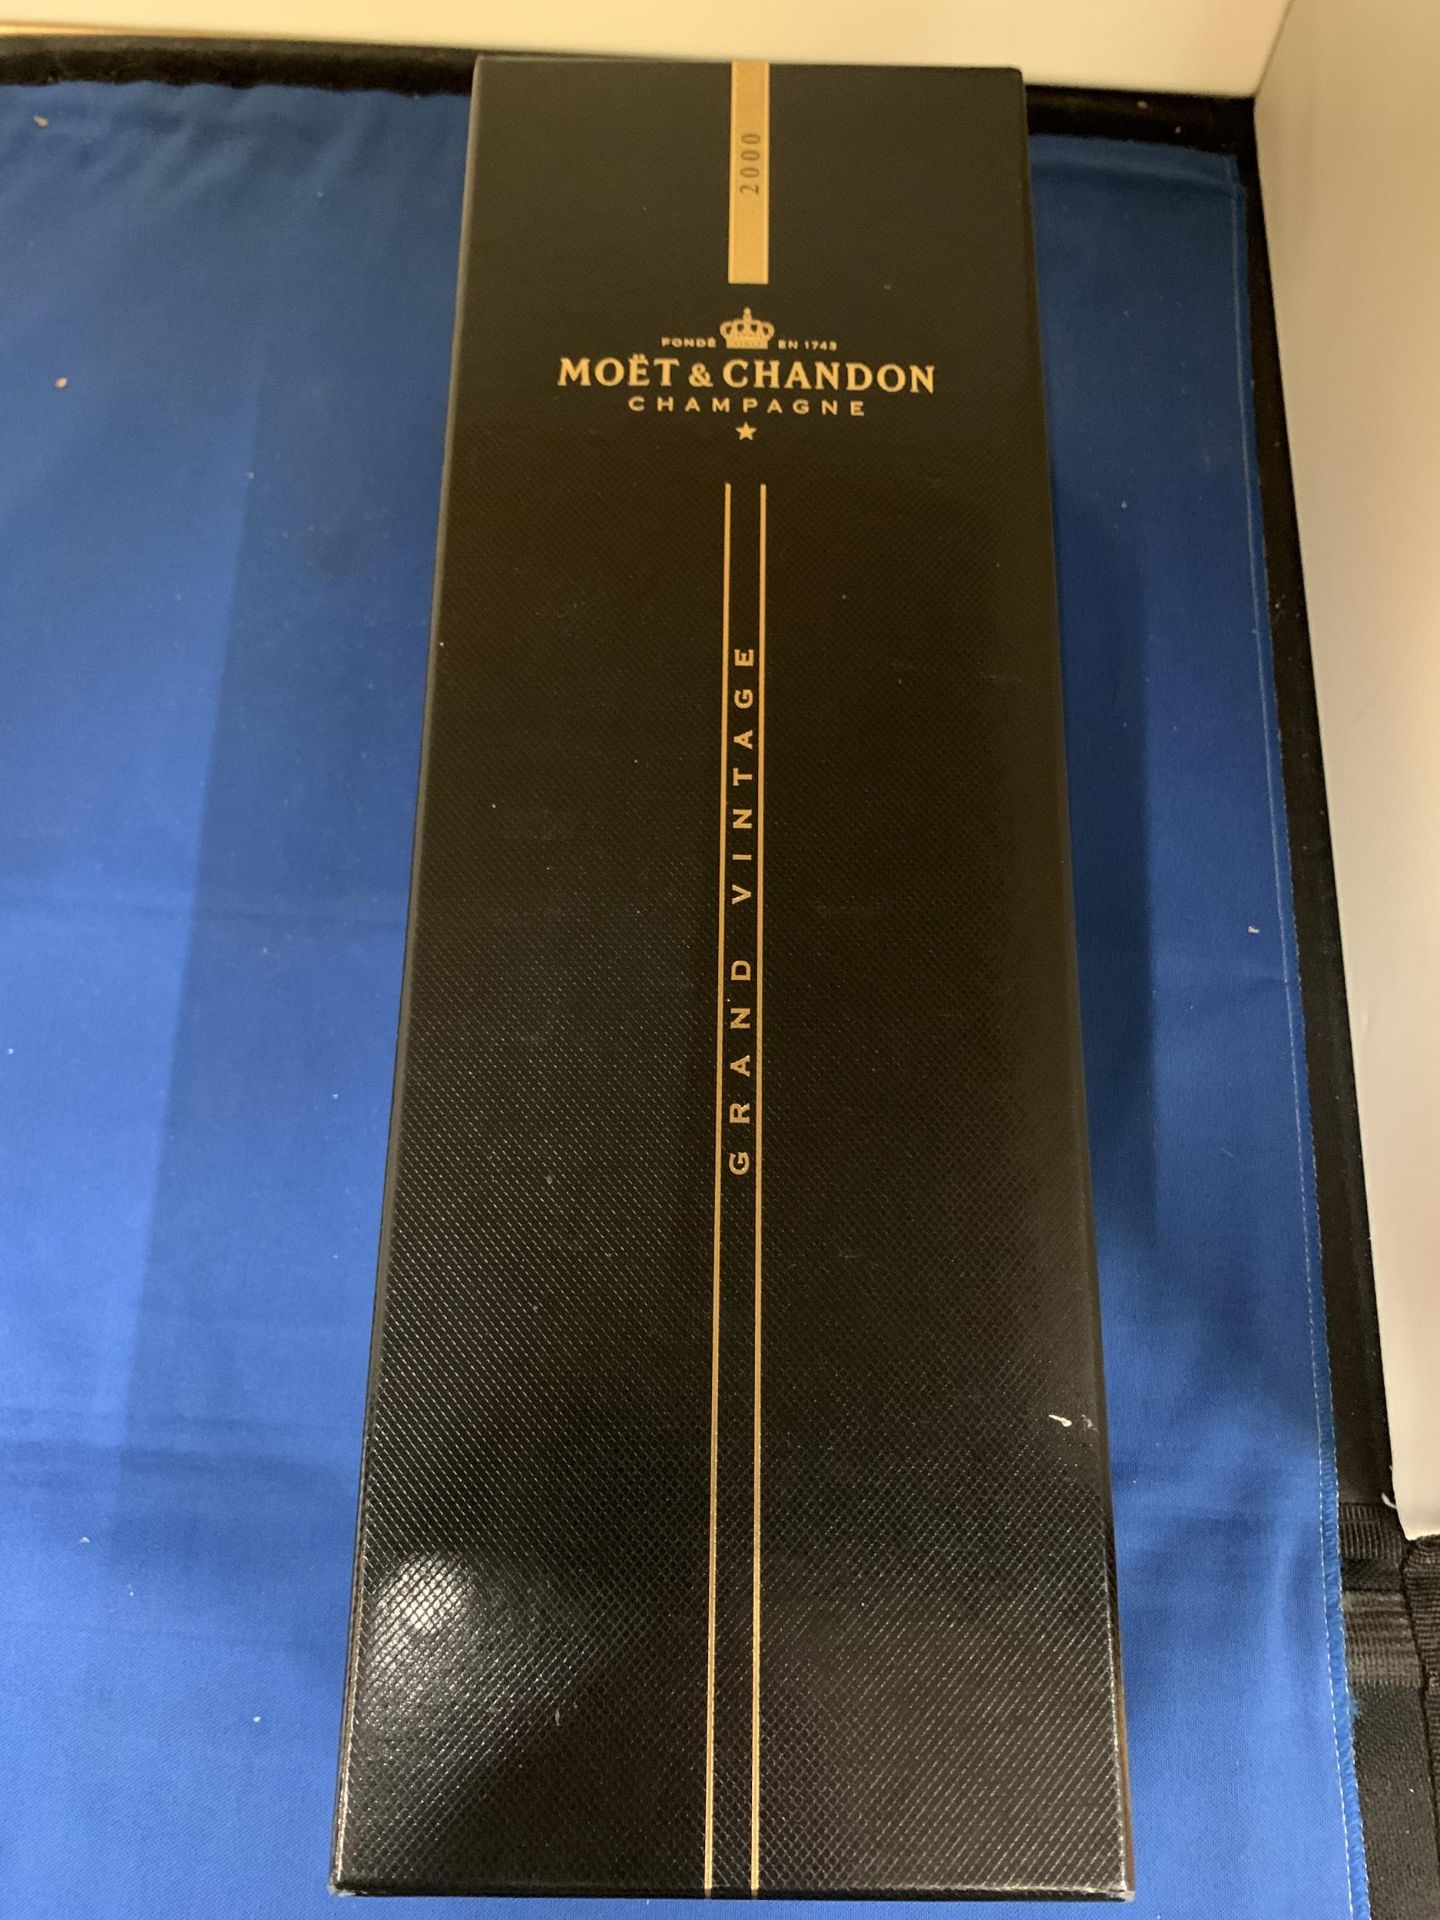 A BOXED BOTTLE OF MOET AND CHANDON GRAND VINTAGE 2000 CHAMPAGNE - Image 3 of 3